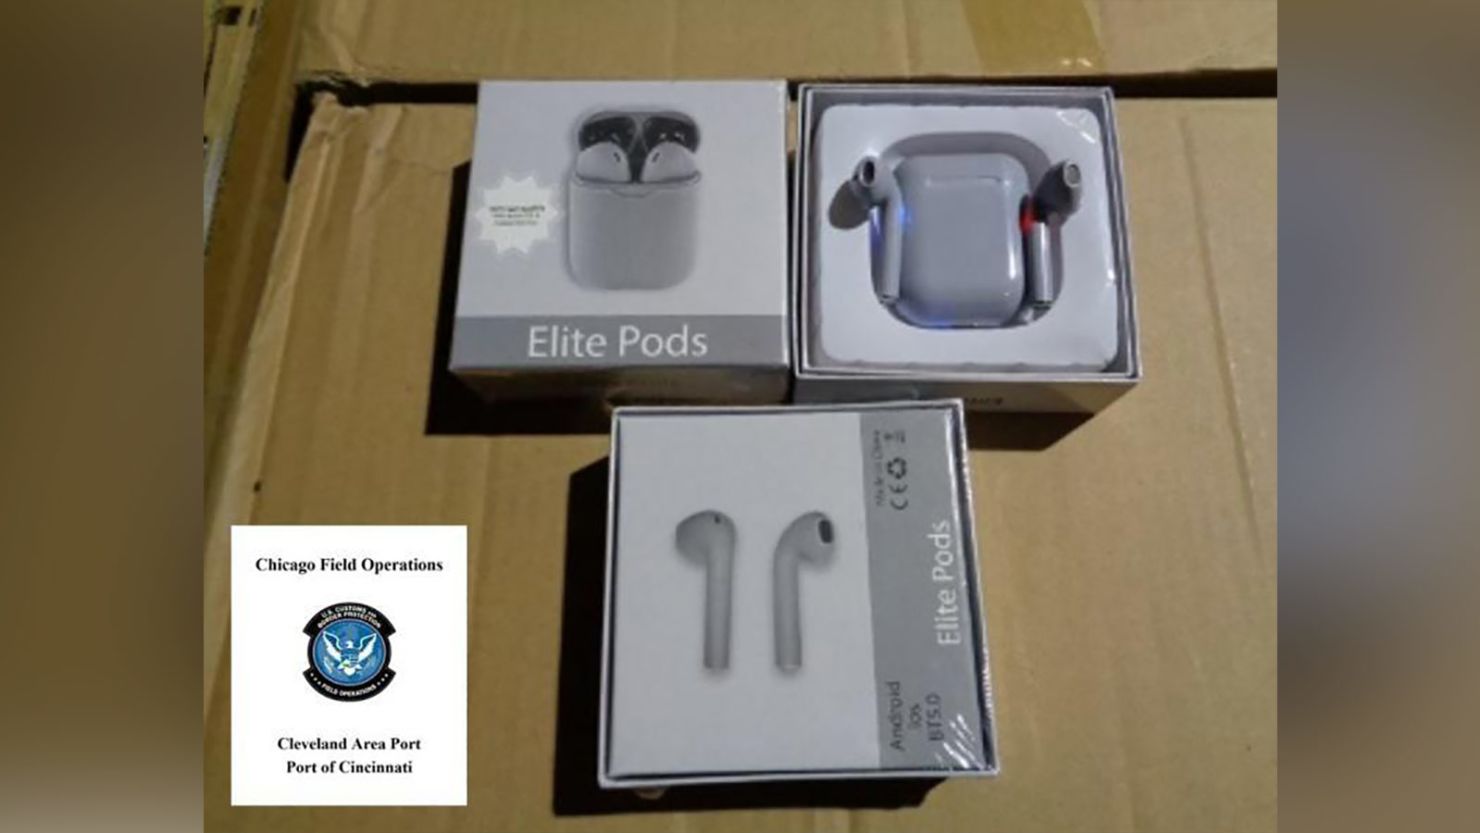 The "Elite Pods," which resembled Apple AirPods, were seized by Cincinnati CBP.